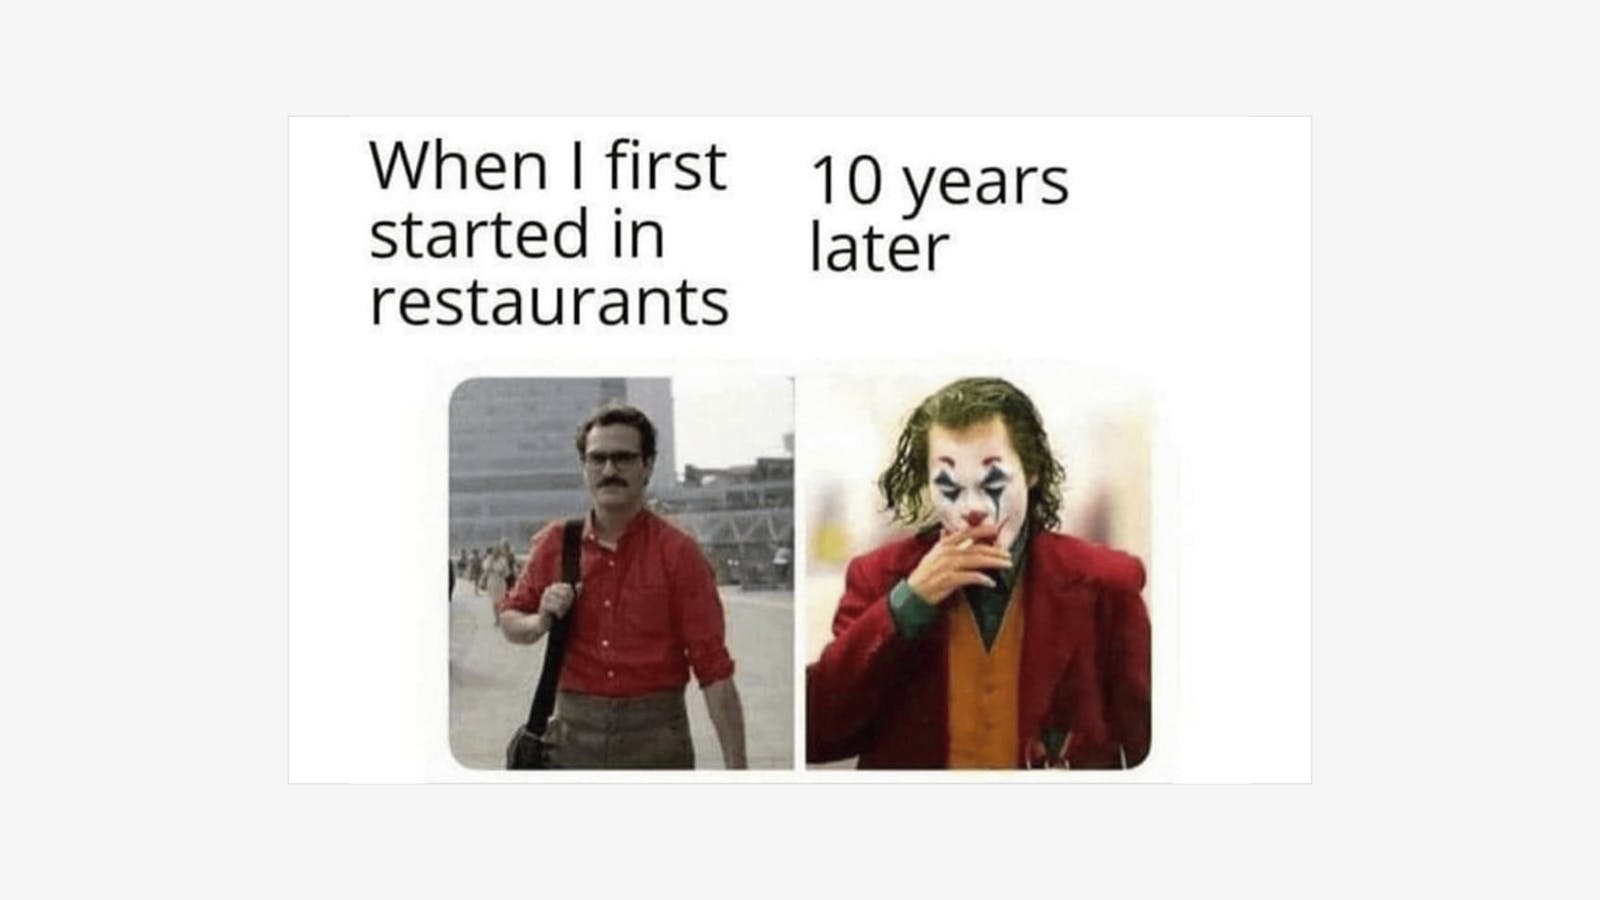 Funny and relatable Joker meme about first starting in restaurants vs. 10 years later. 